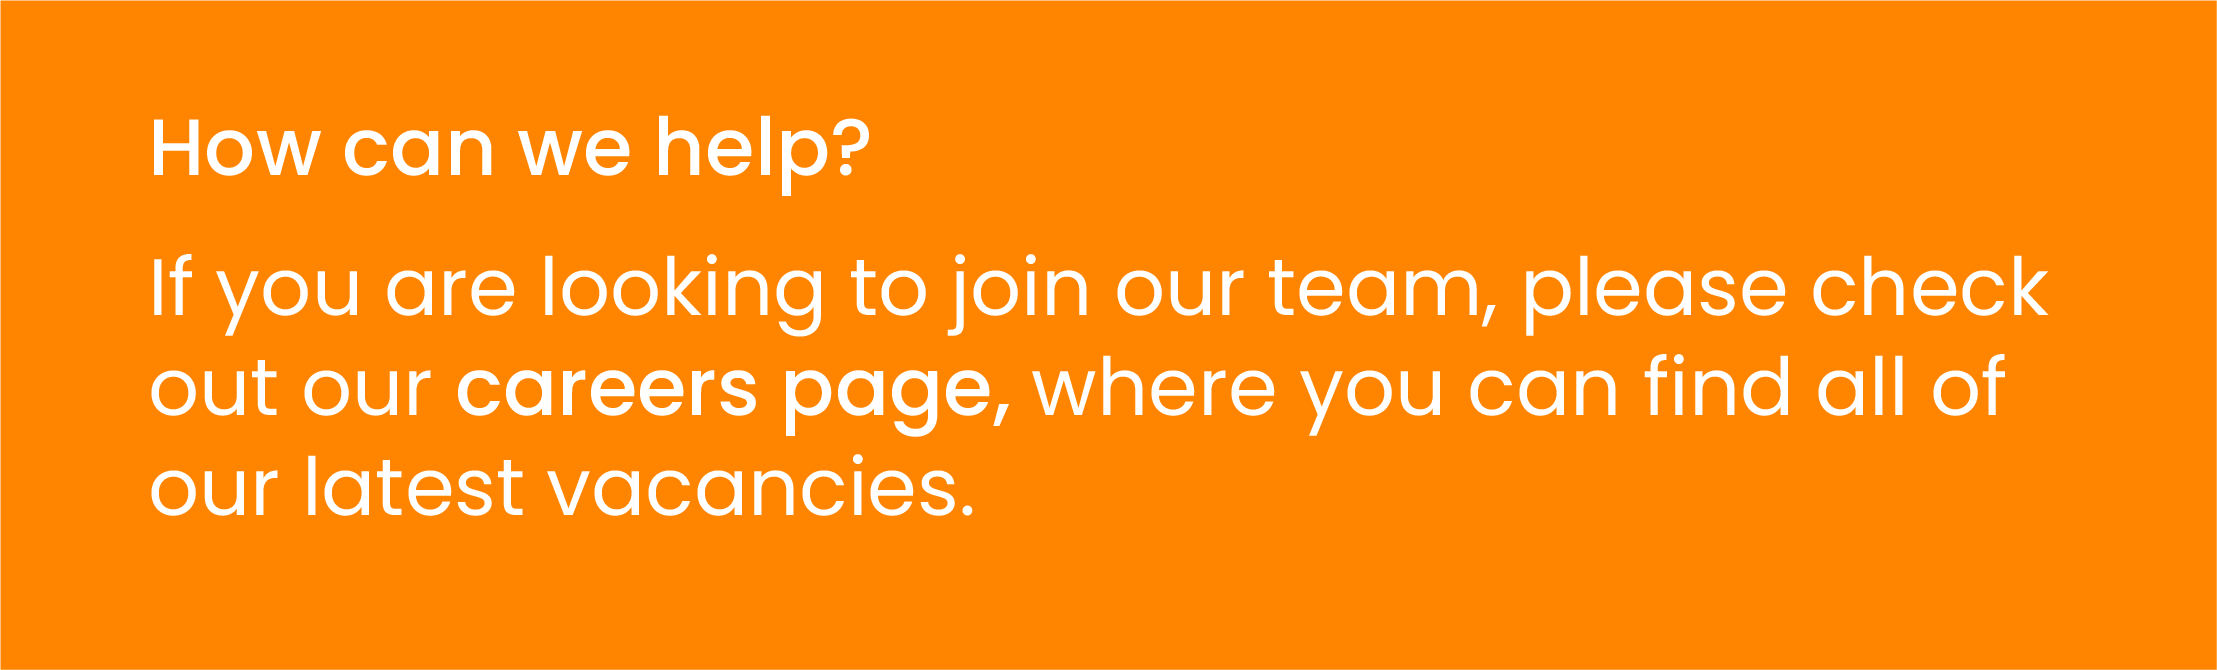 How can we help? If you are looking to join our team, please check out our careers page, where you can find all of out latest vacancies.